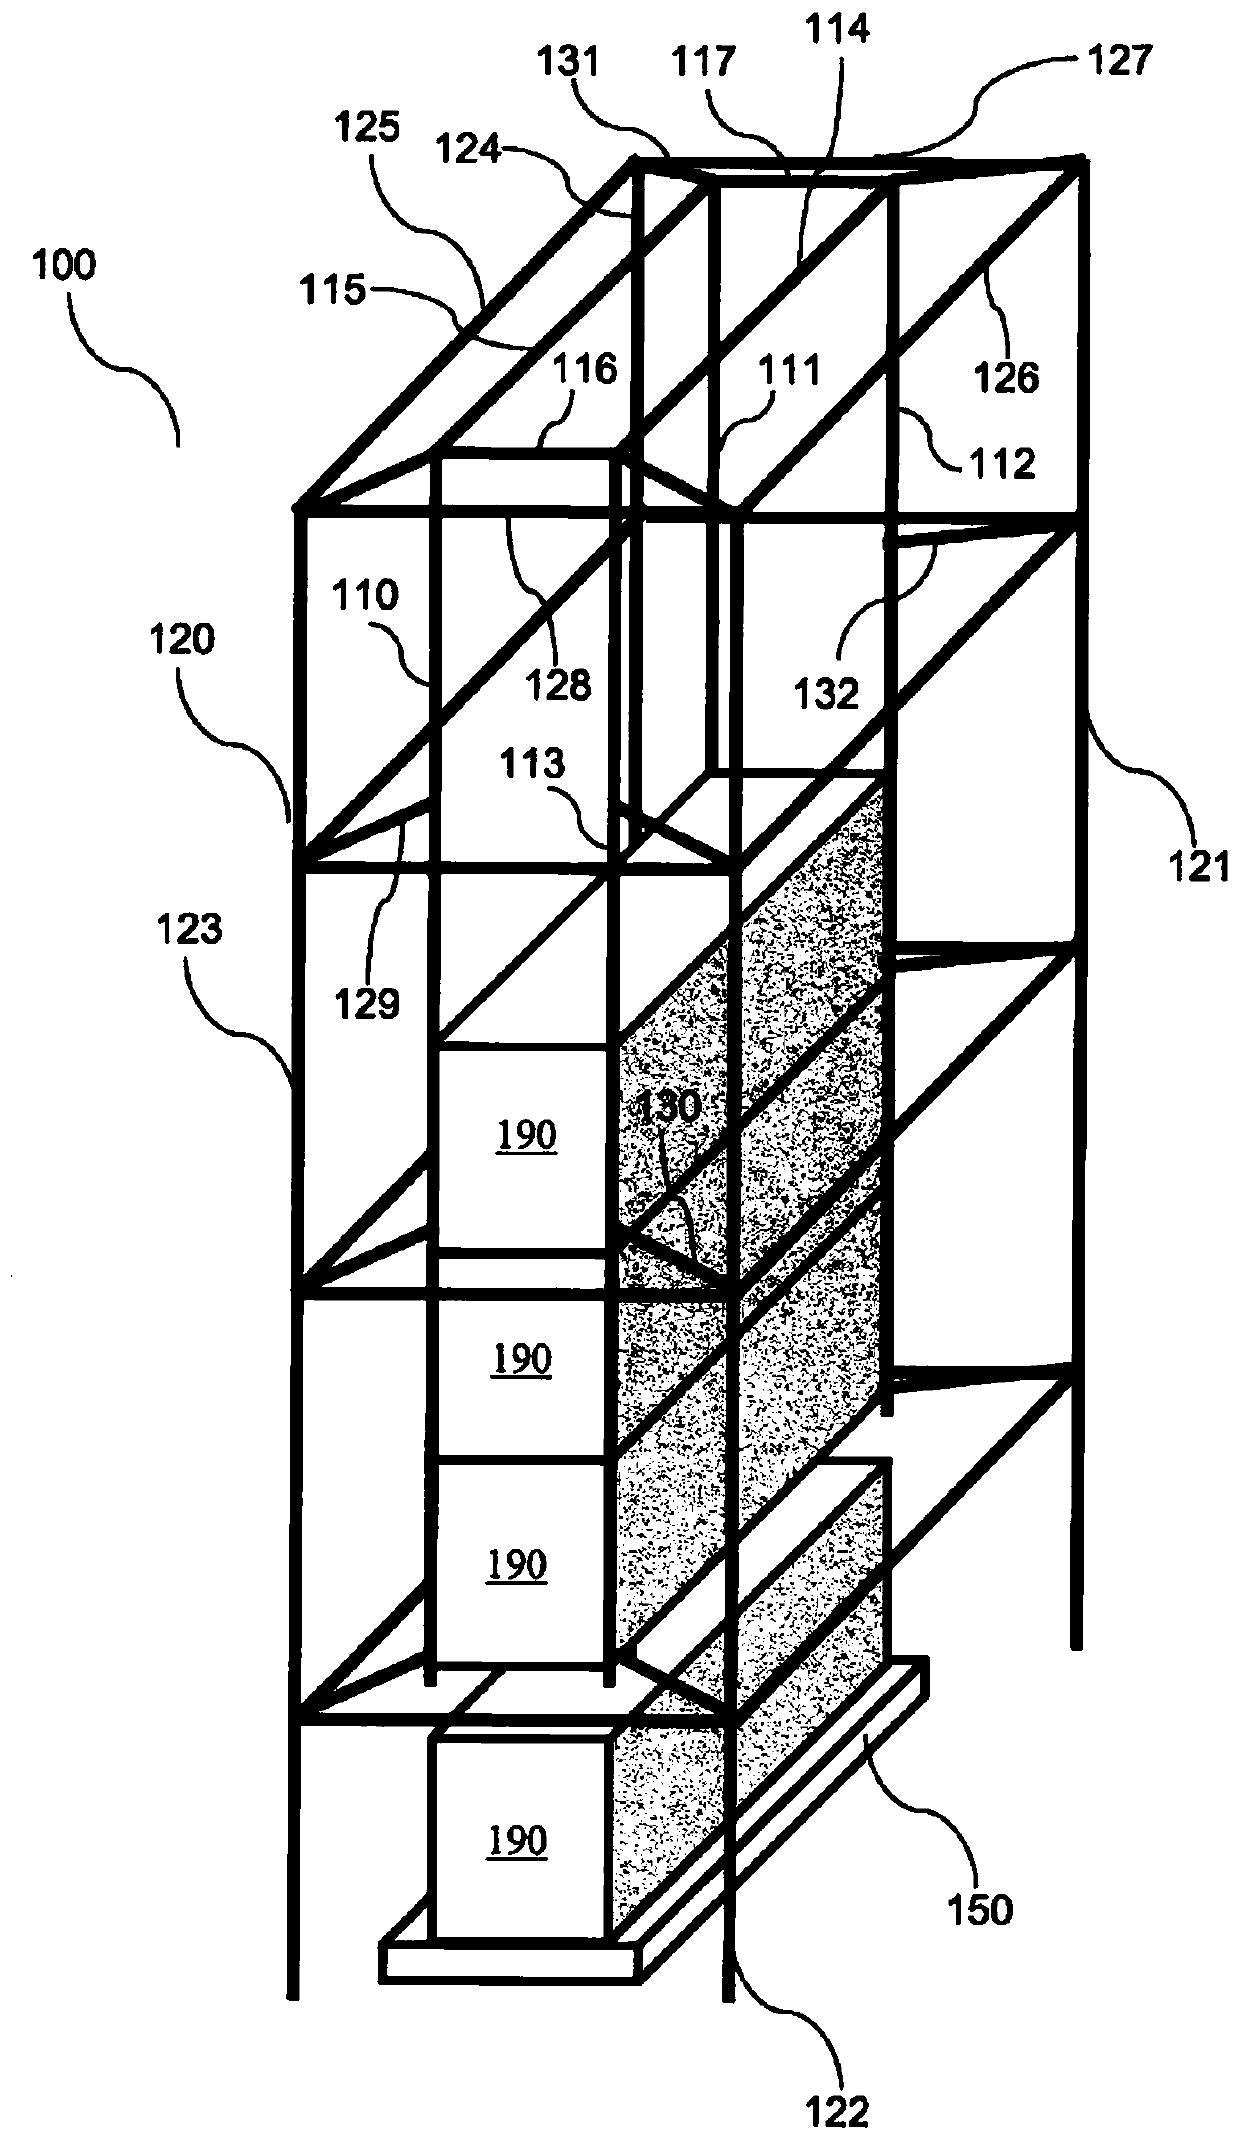 Reverse stacking cell guide for storing of iso shipping containers